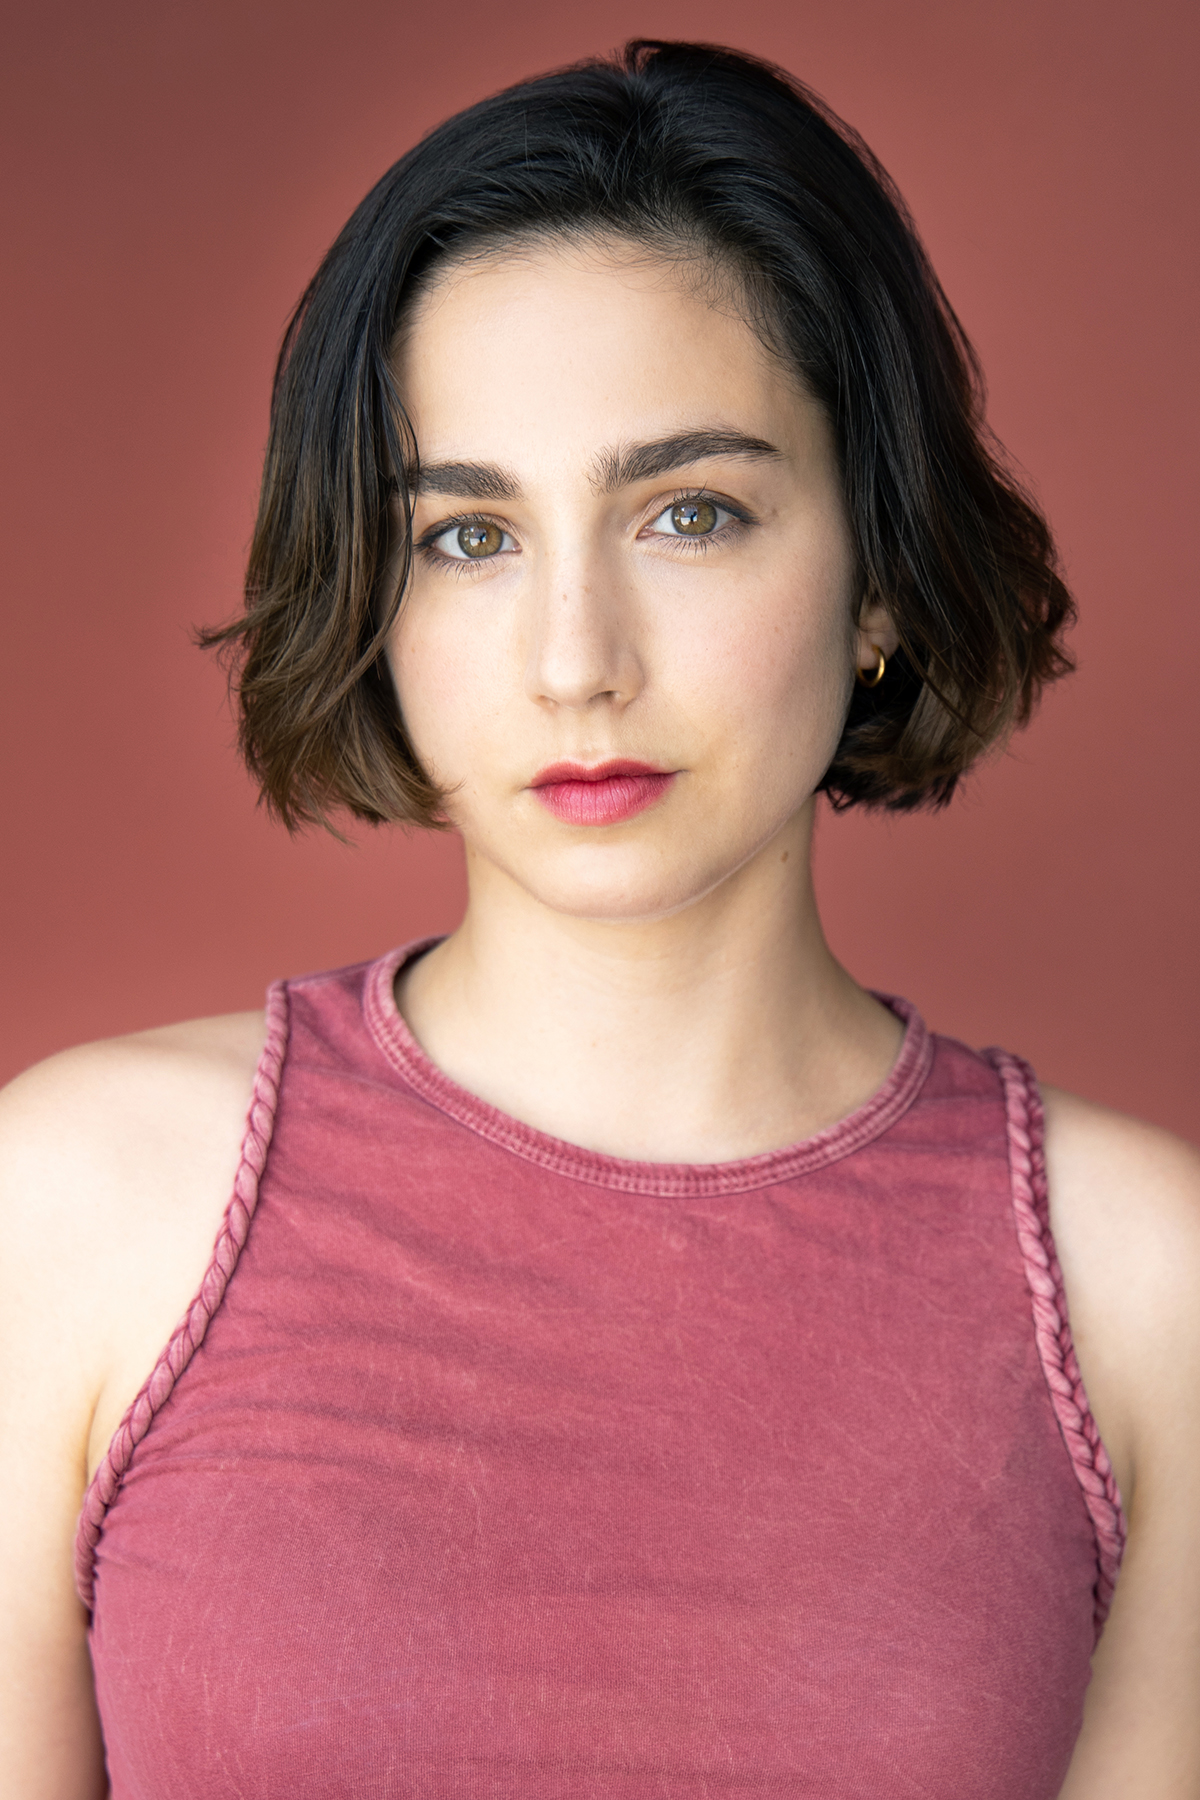 dave durr recommends molly ephraim images pic